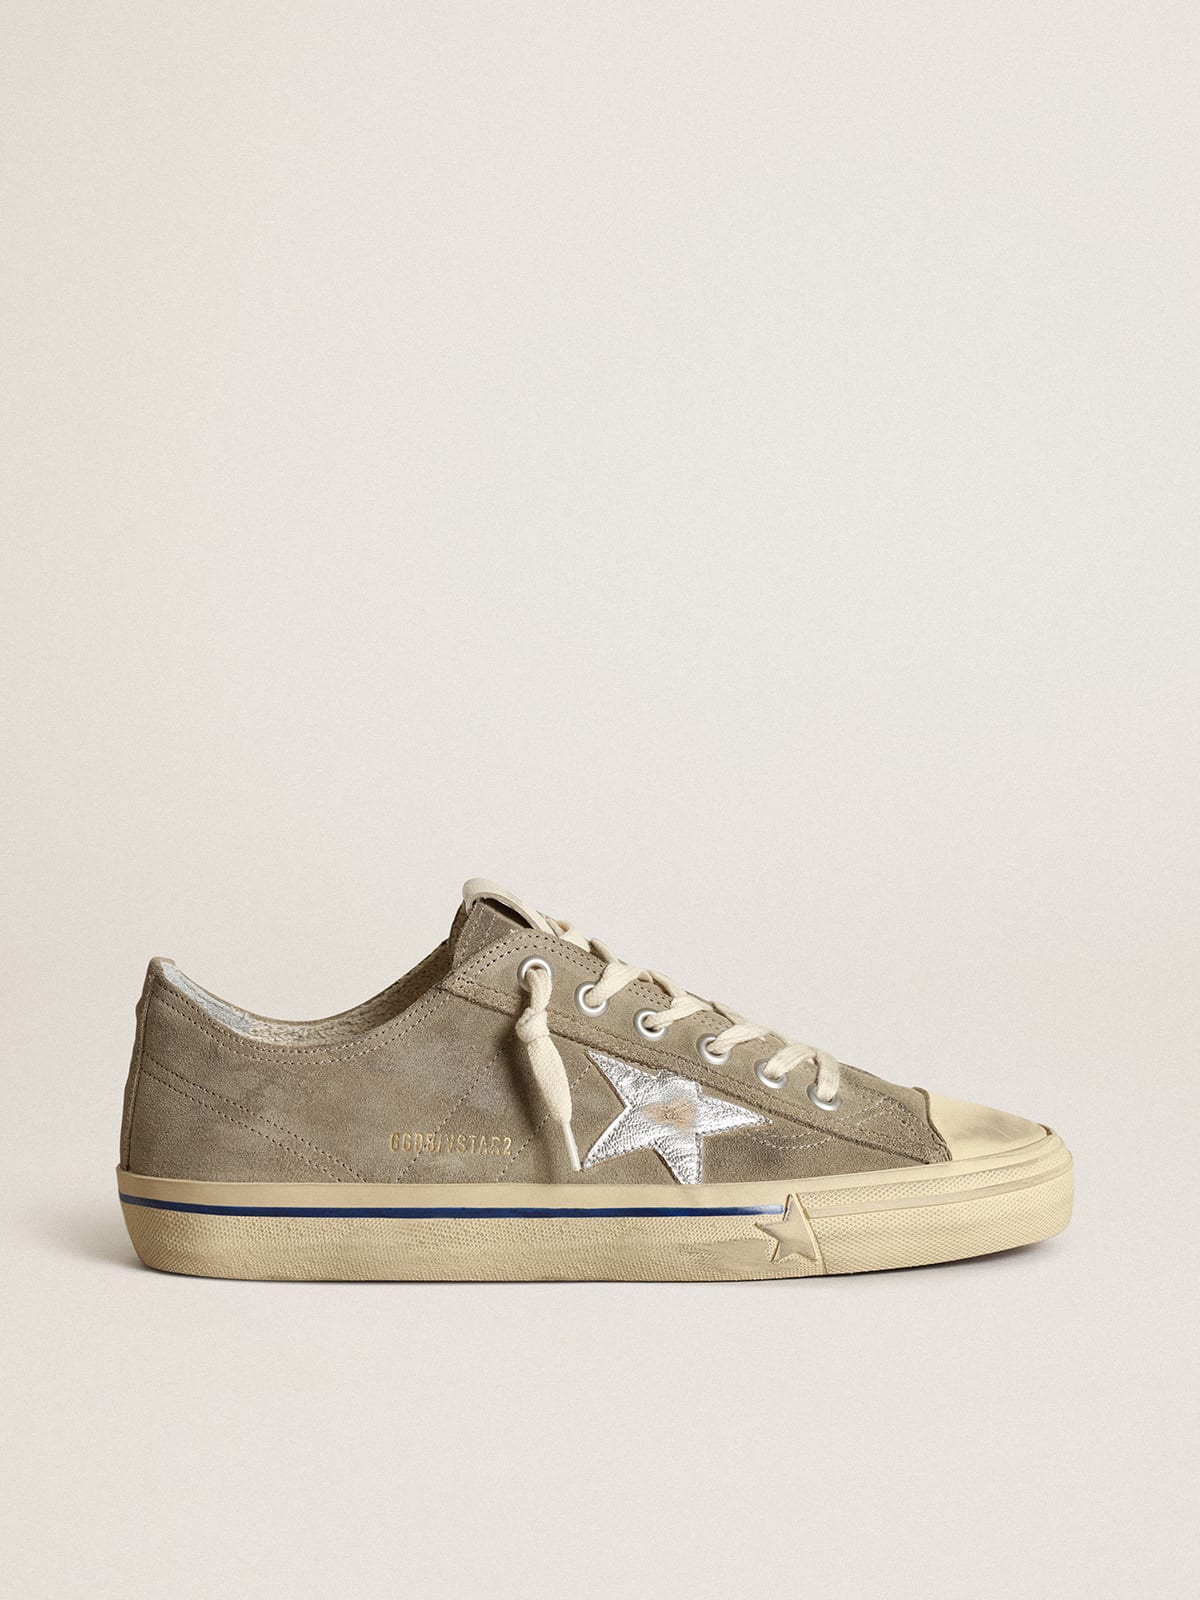 Men's V-Star with suede upper and silver star